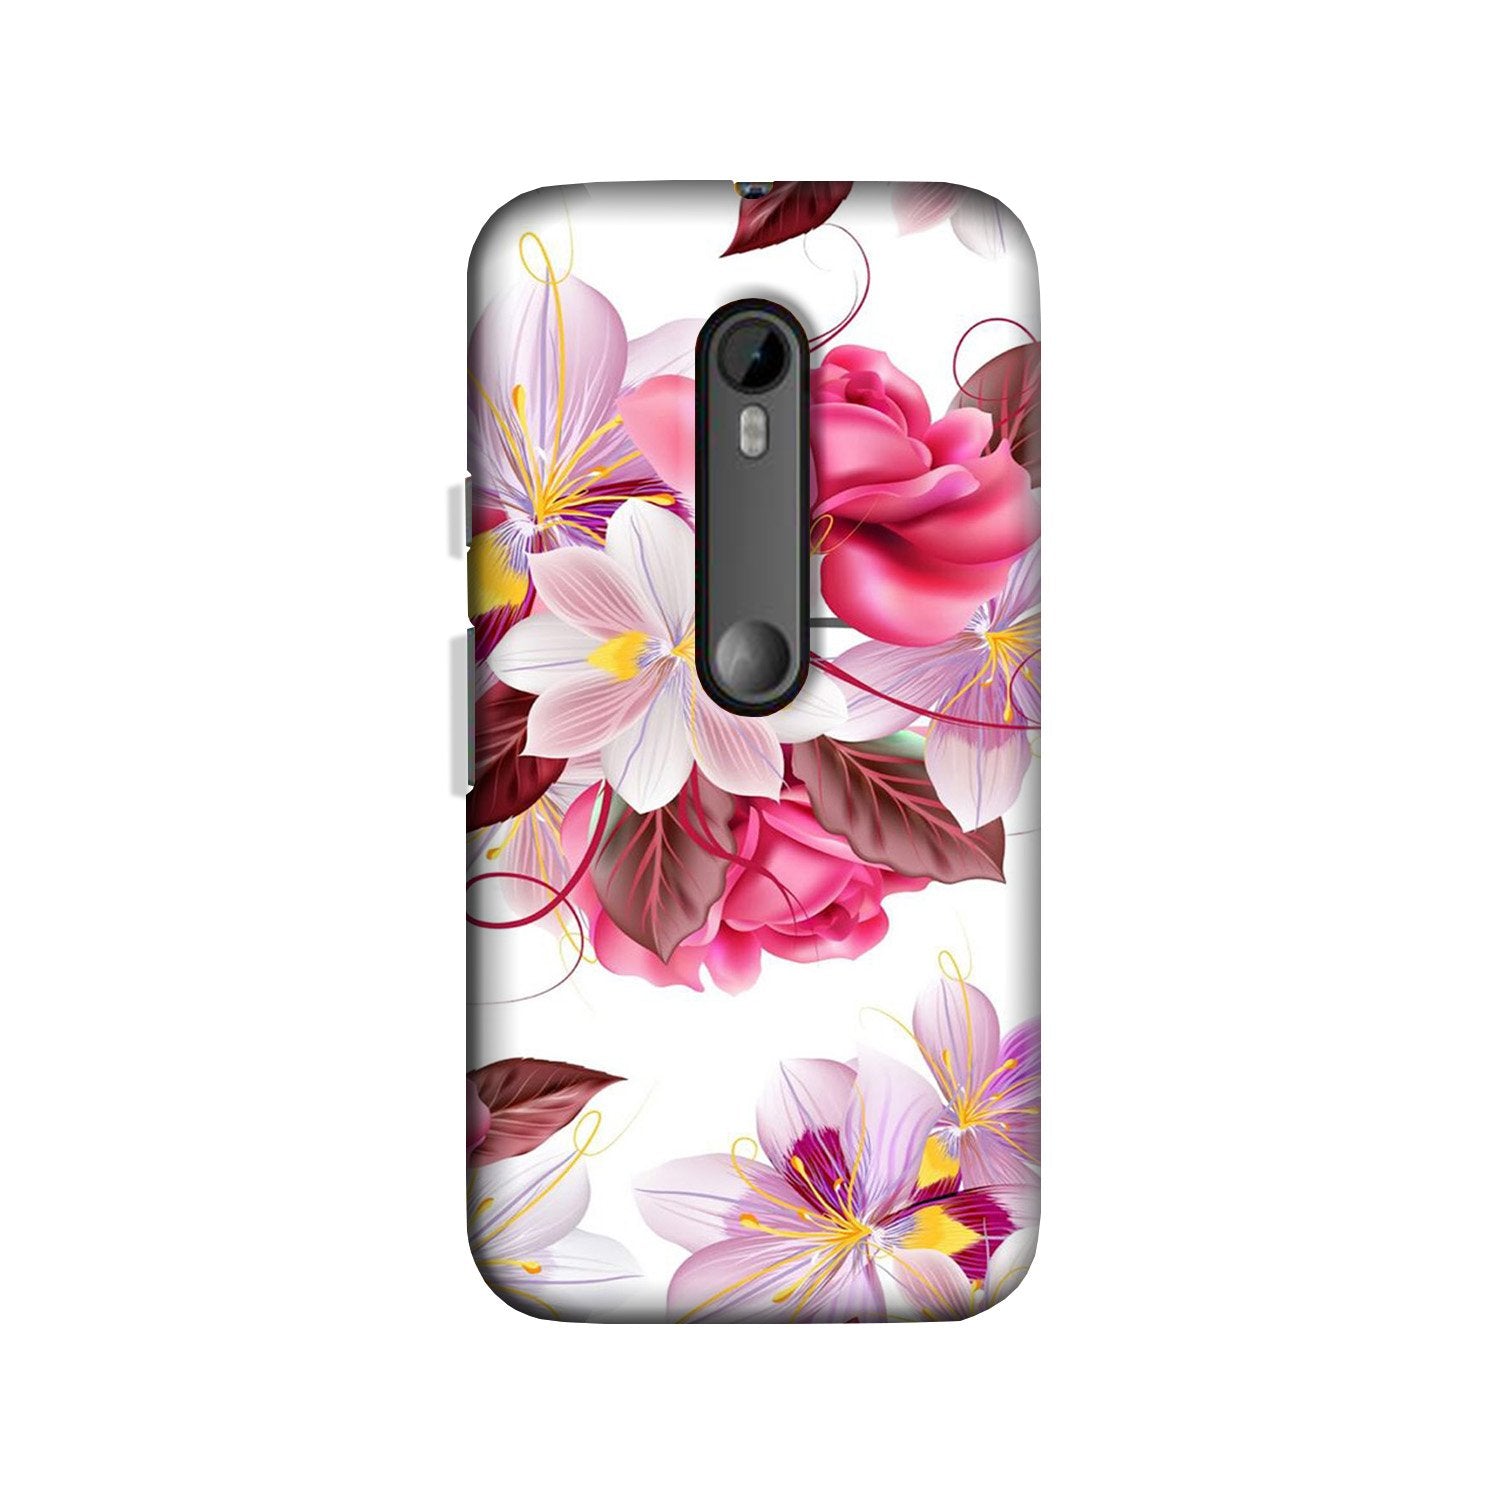 Beautiful flowers Case for Moto G3